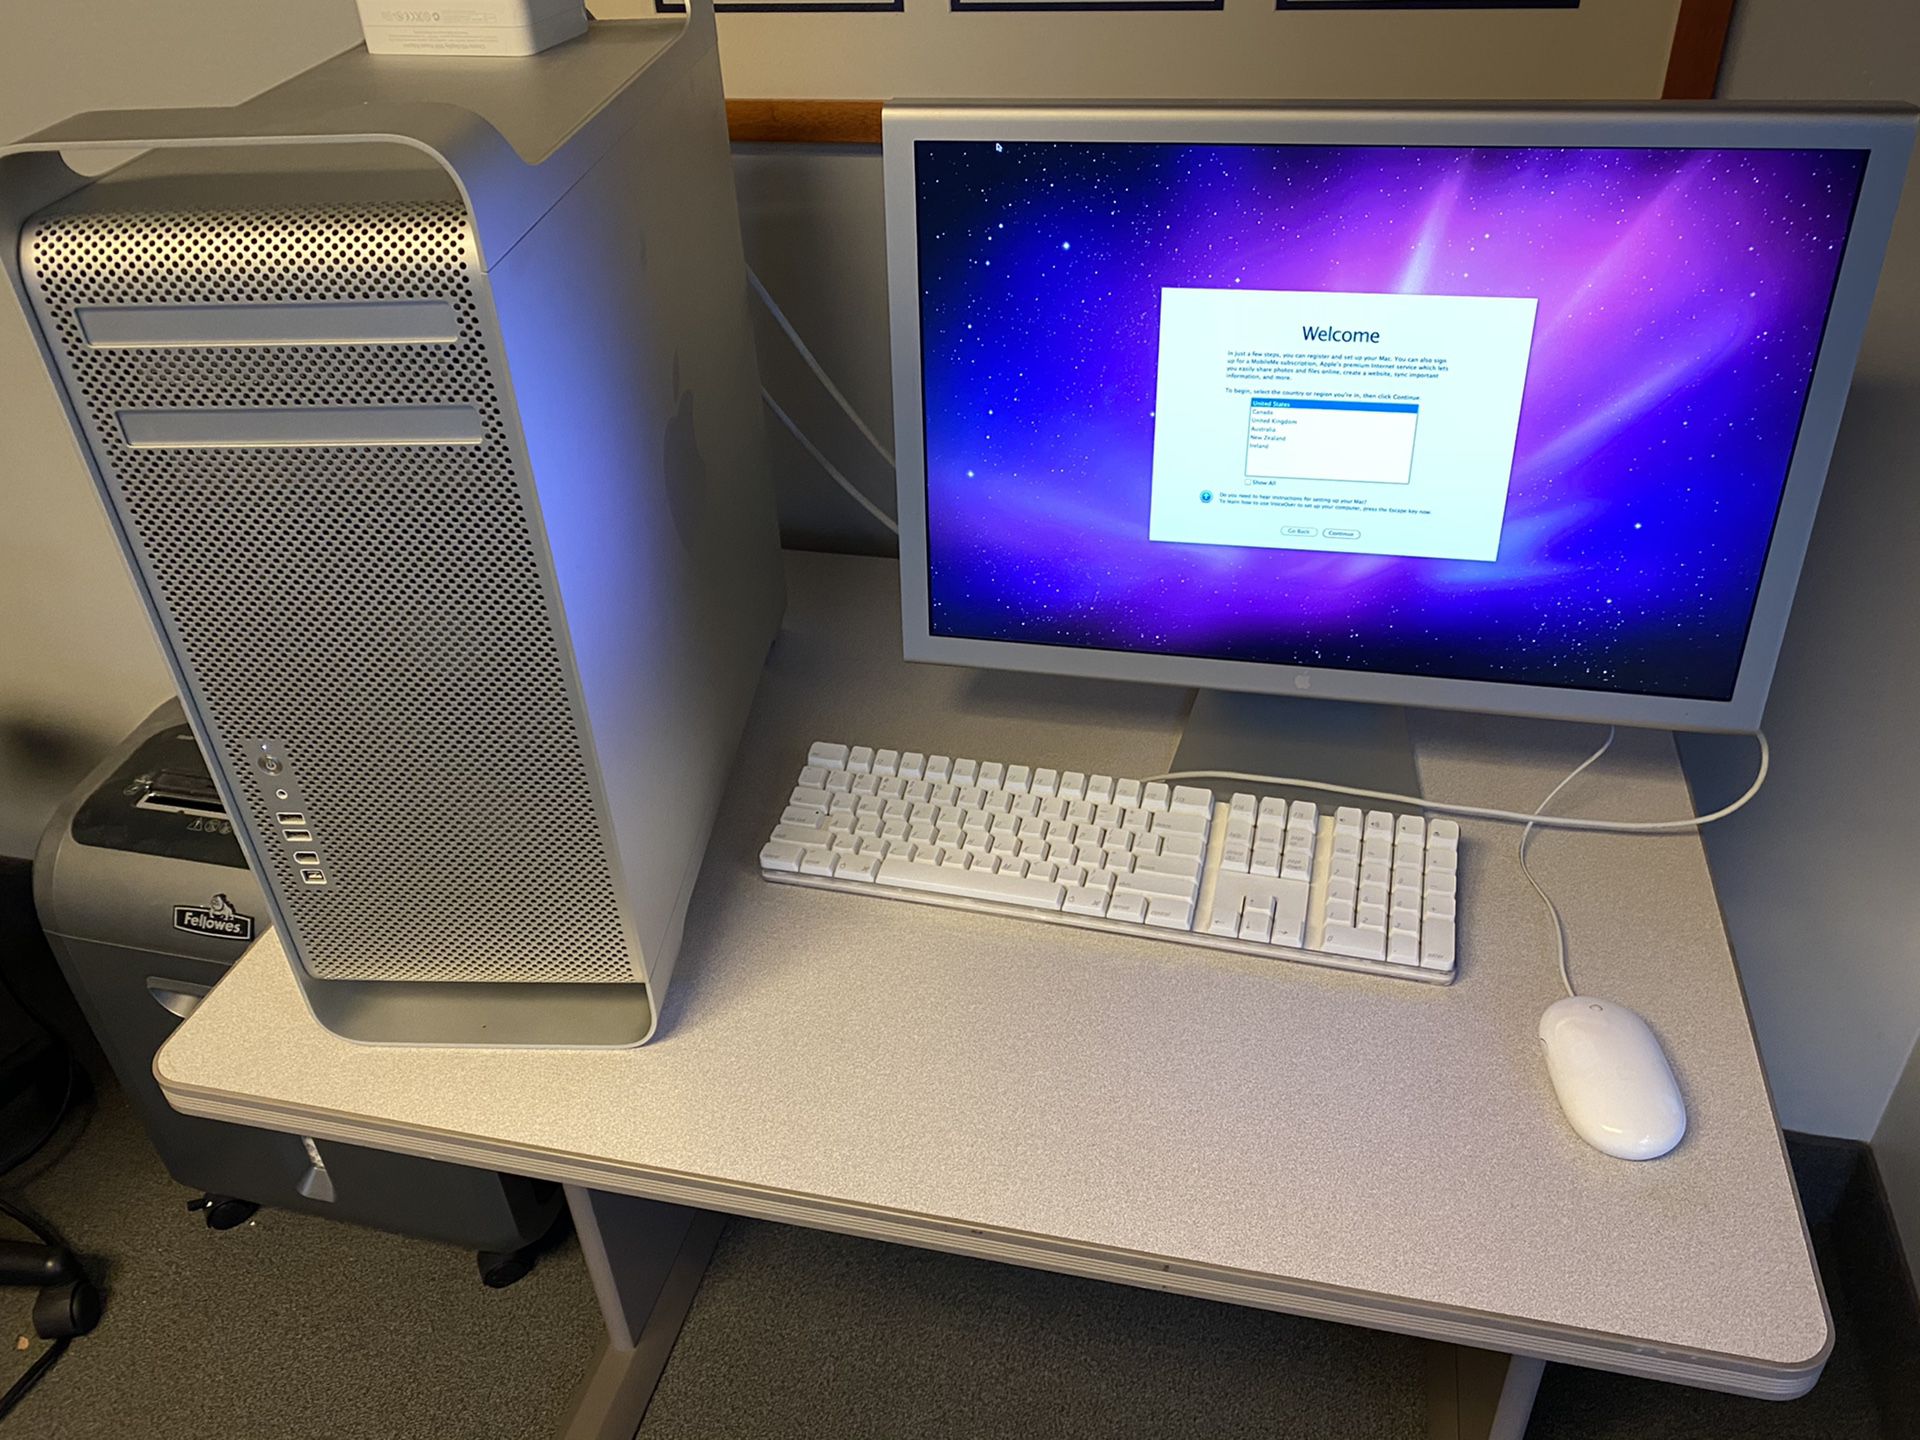 Apple Mac Pro Tower with 23 inch monitor